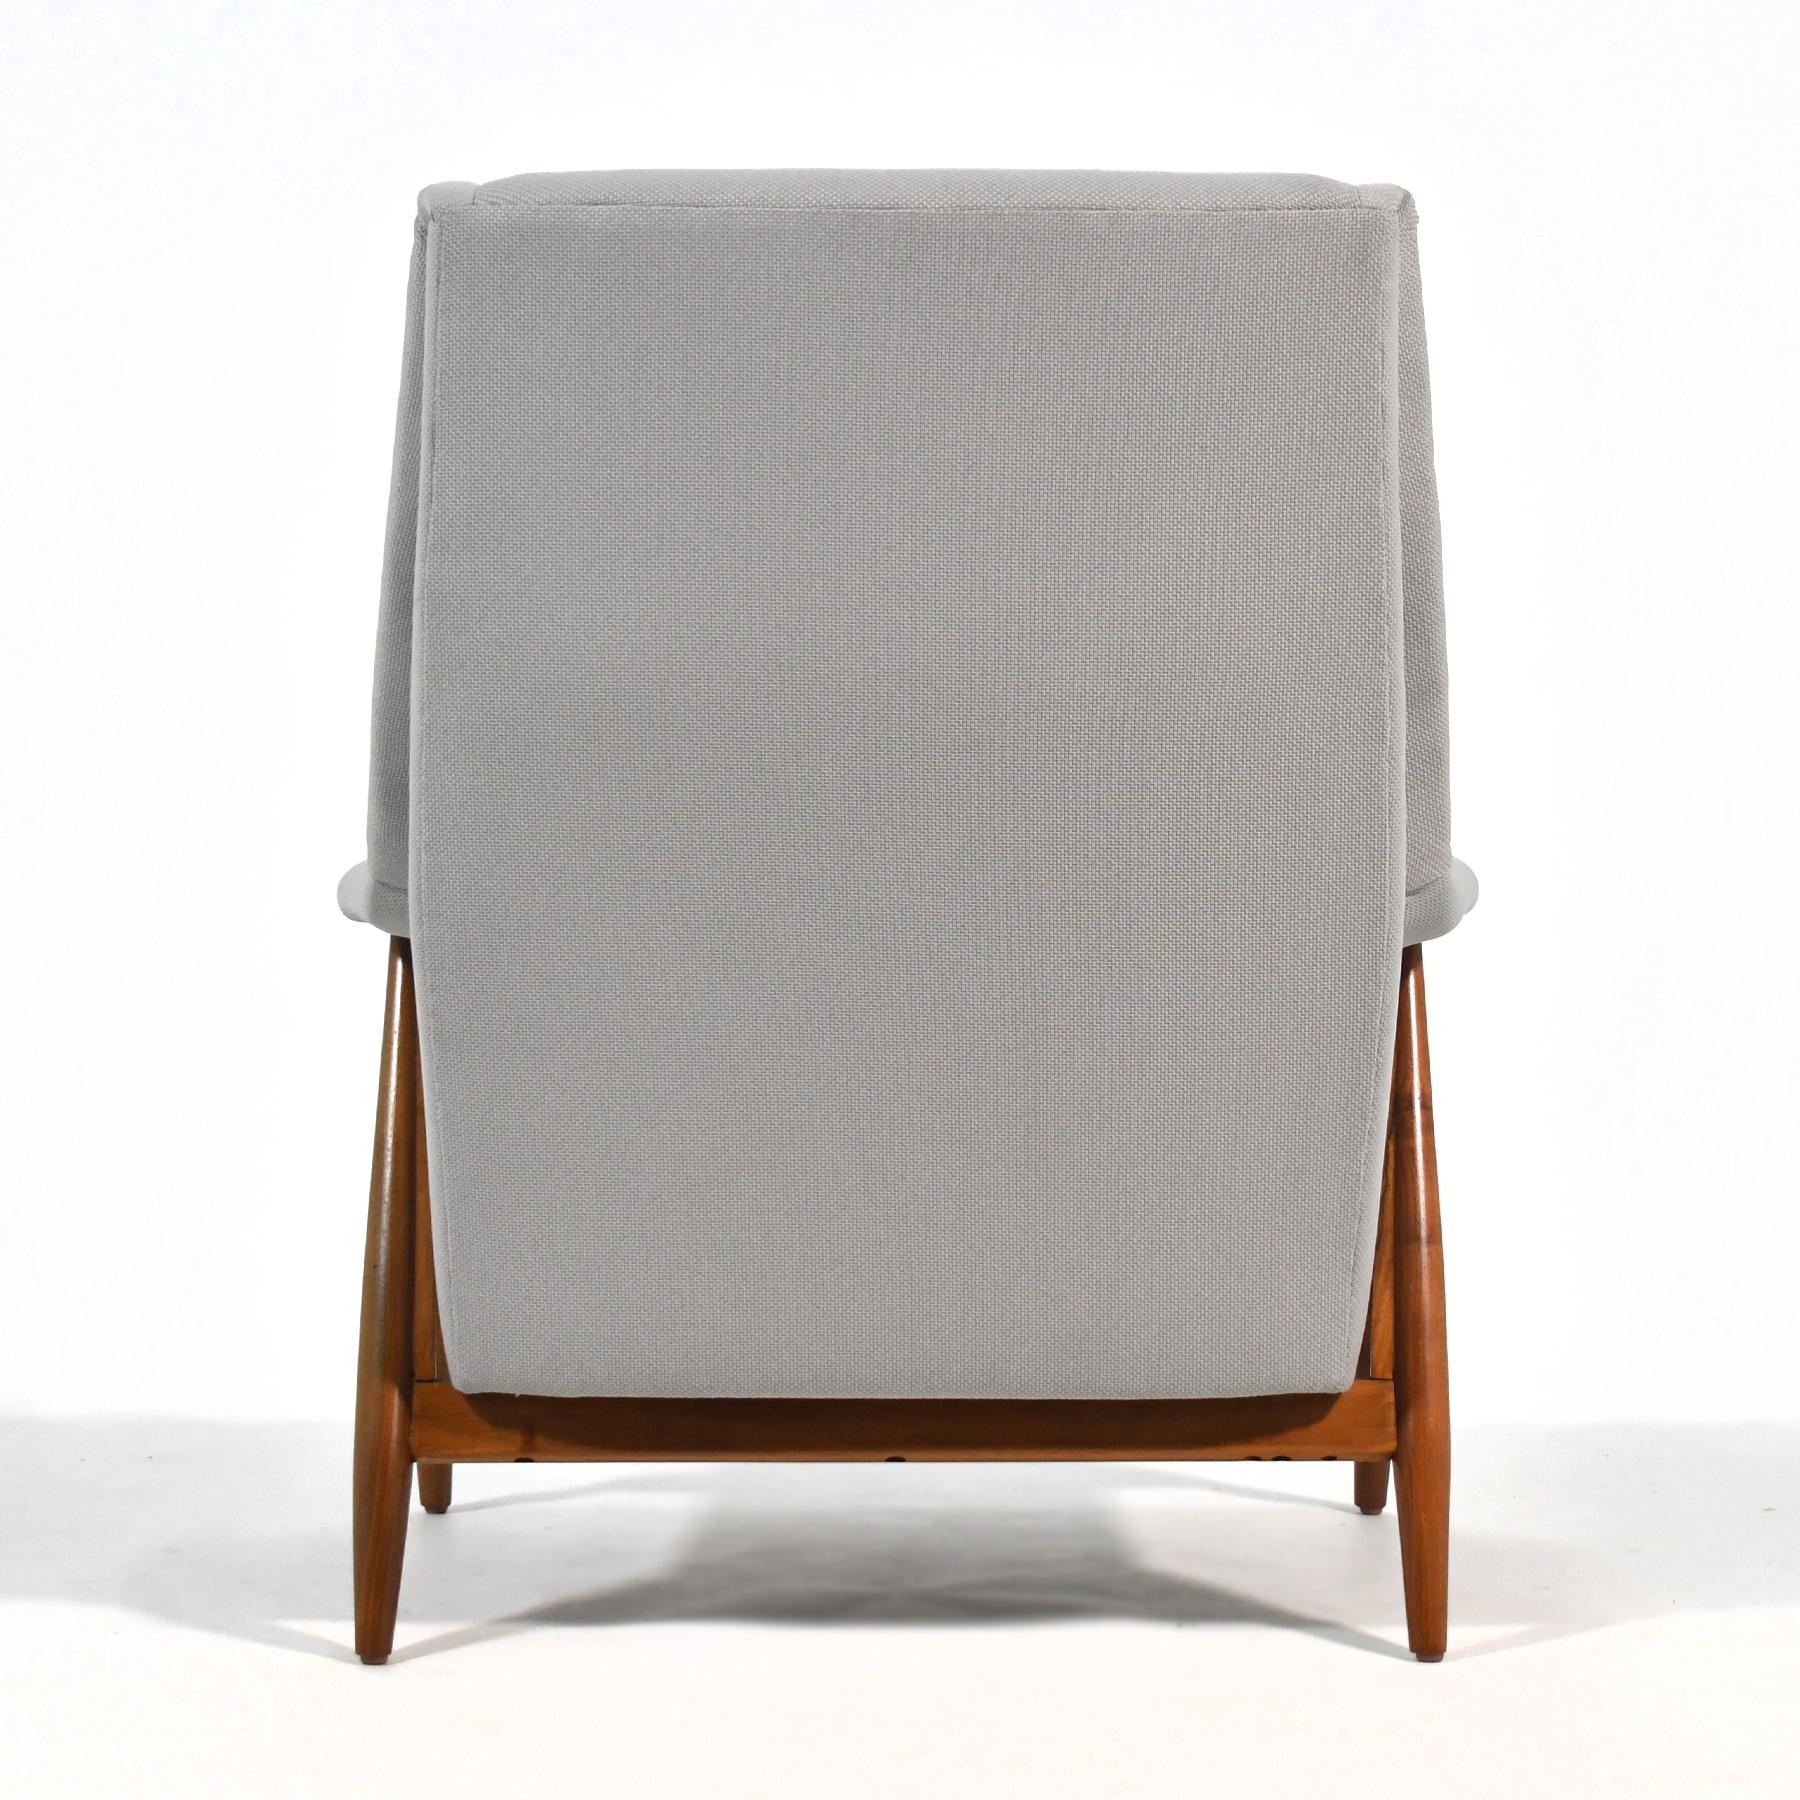 Upholstery Milo Baughman Lounge Chair by Thayer Coggin For Sale